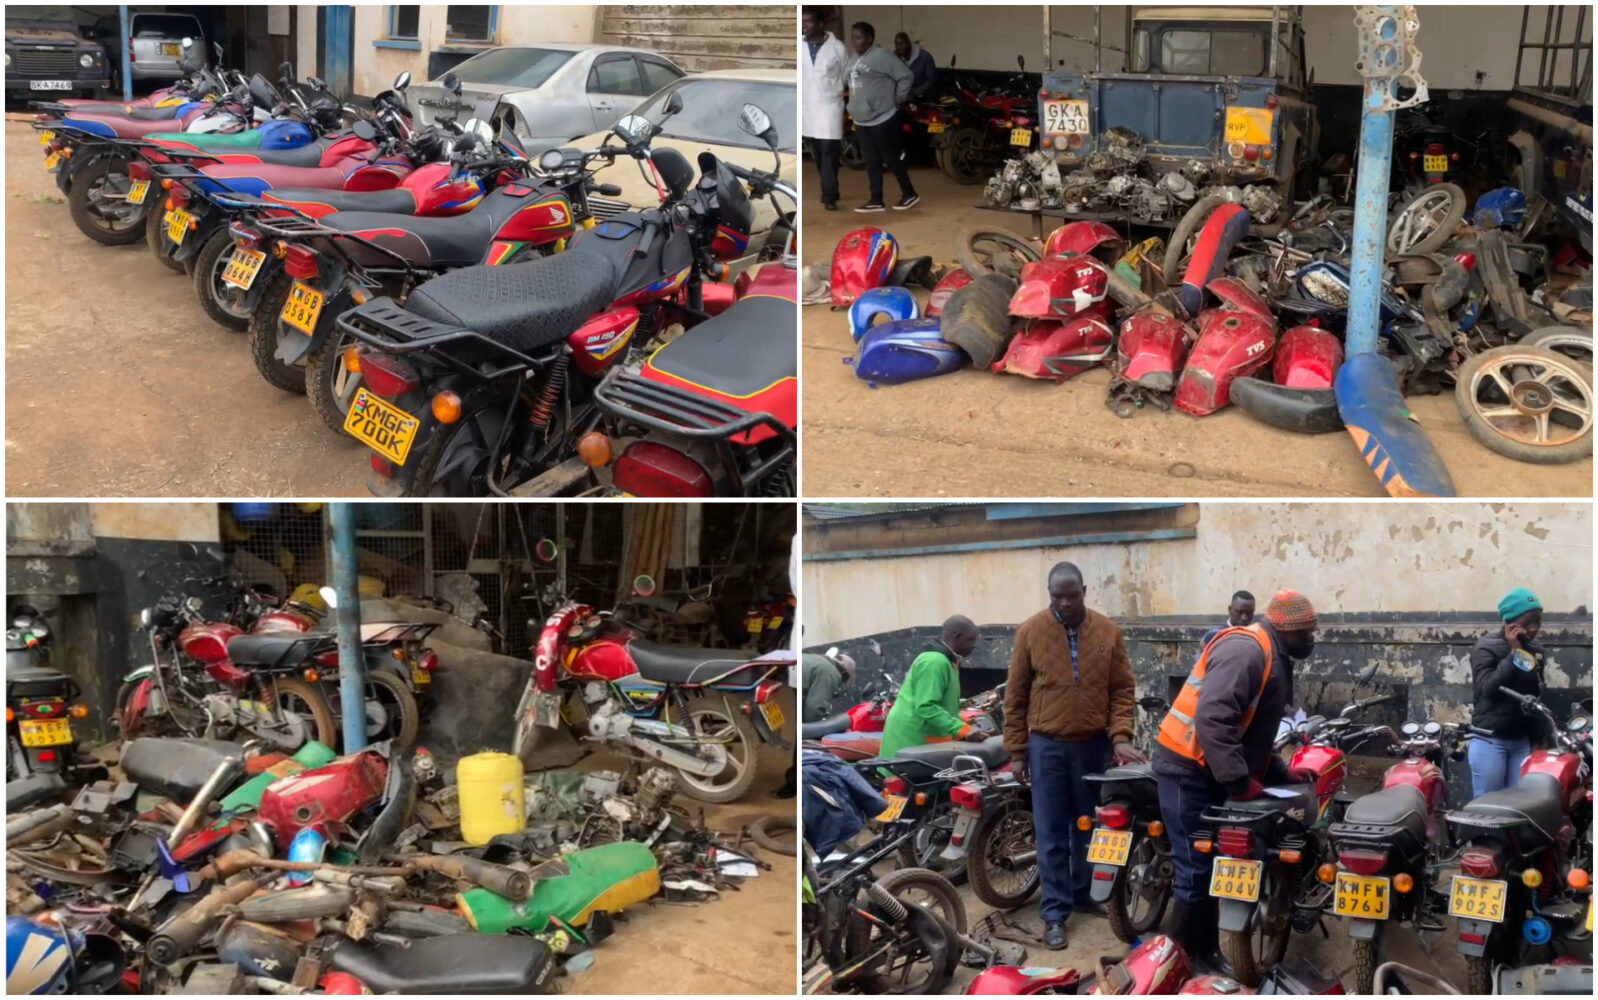 Eldoret: Over 50 stolen motorbikes impounded, 6 suspects arrested as police unearth syndicate